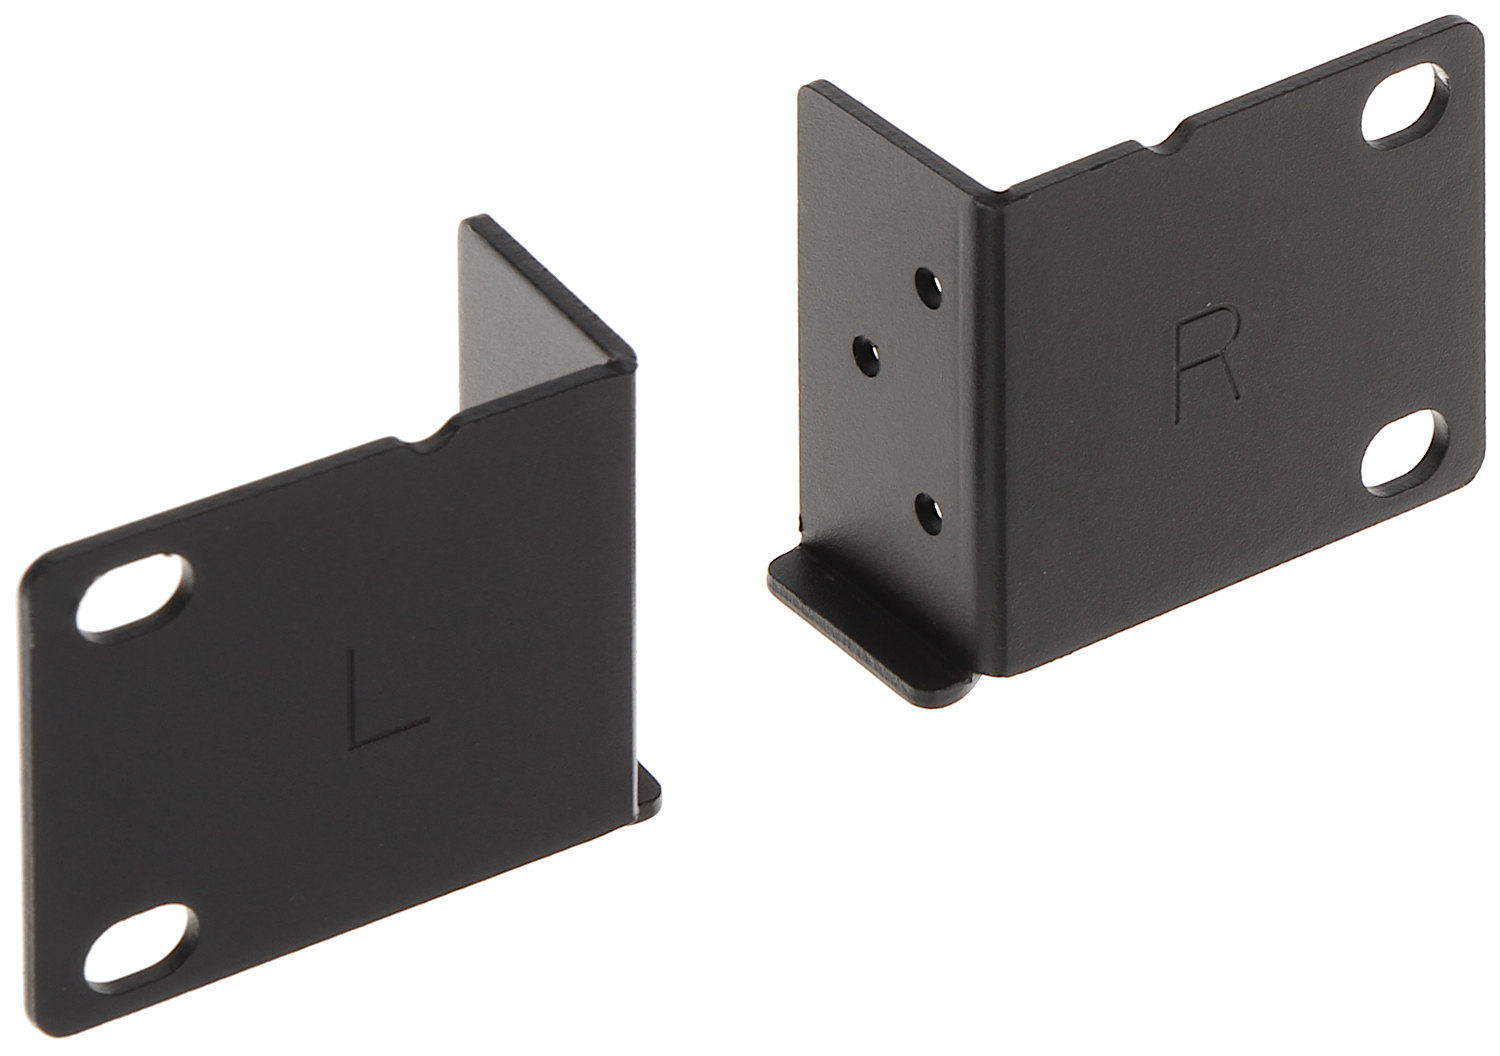 Mounting Bracket For Mounting The Recorder In The Rack Accessories For Recorders Delta